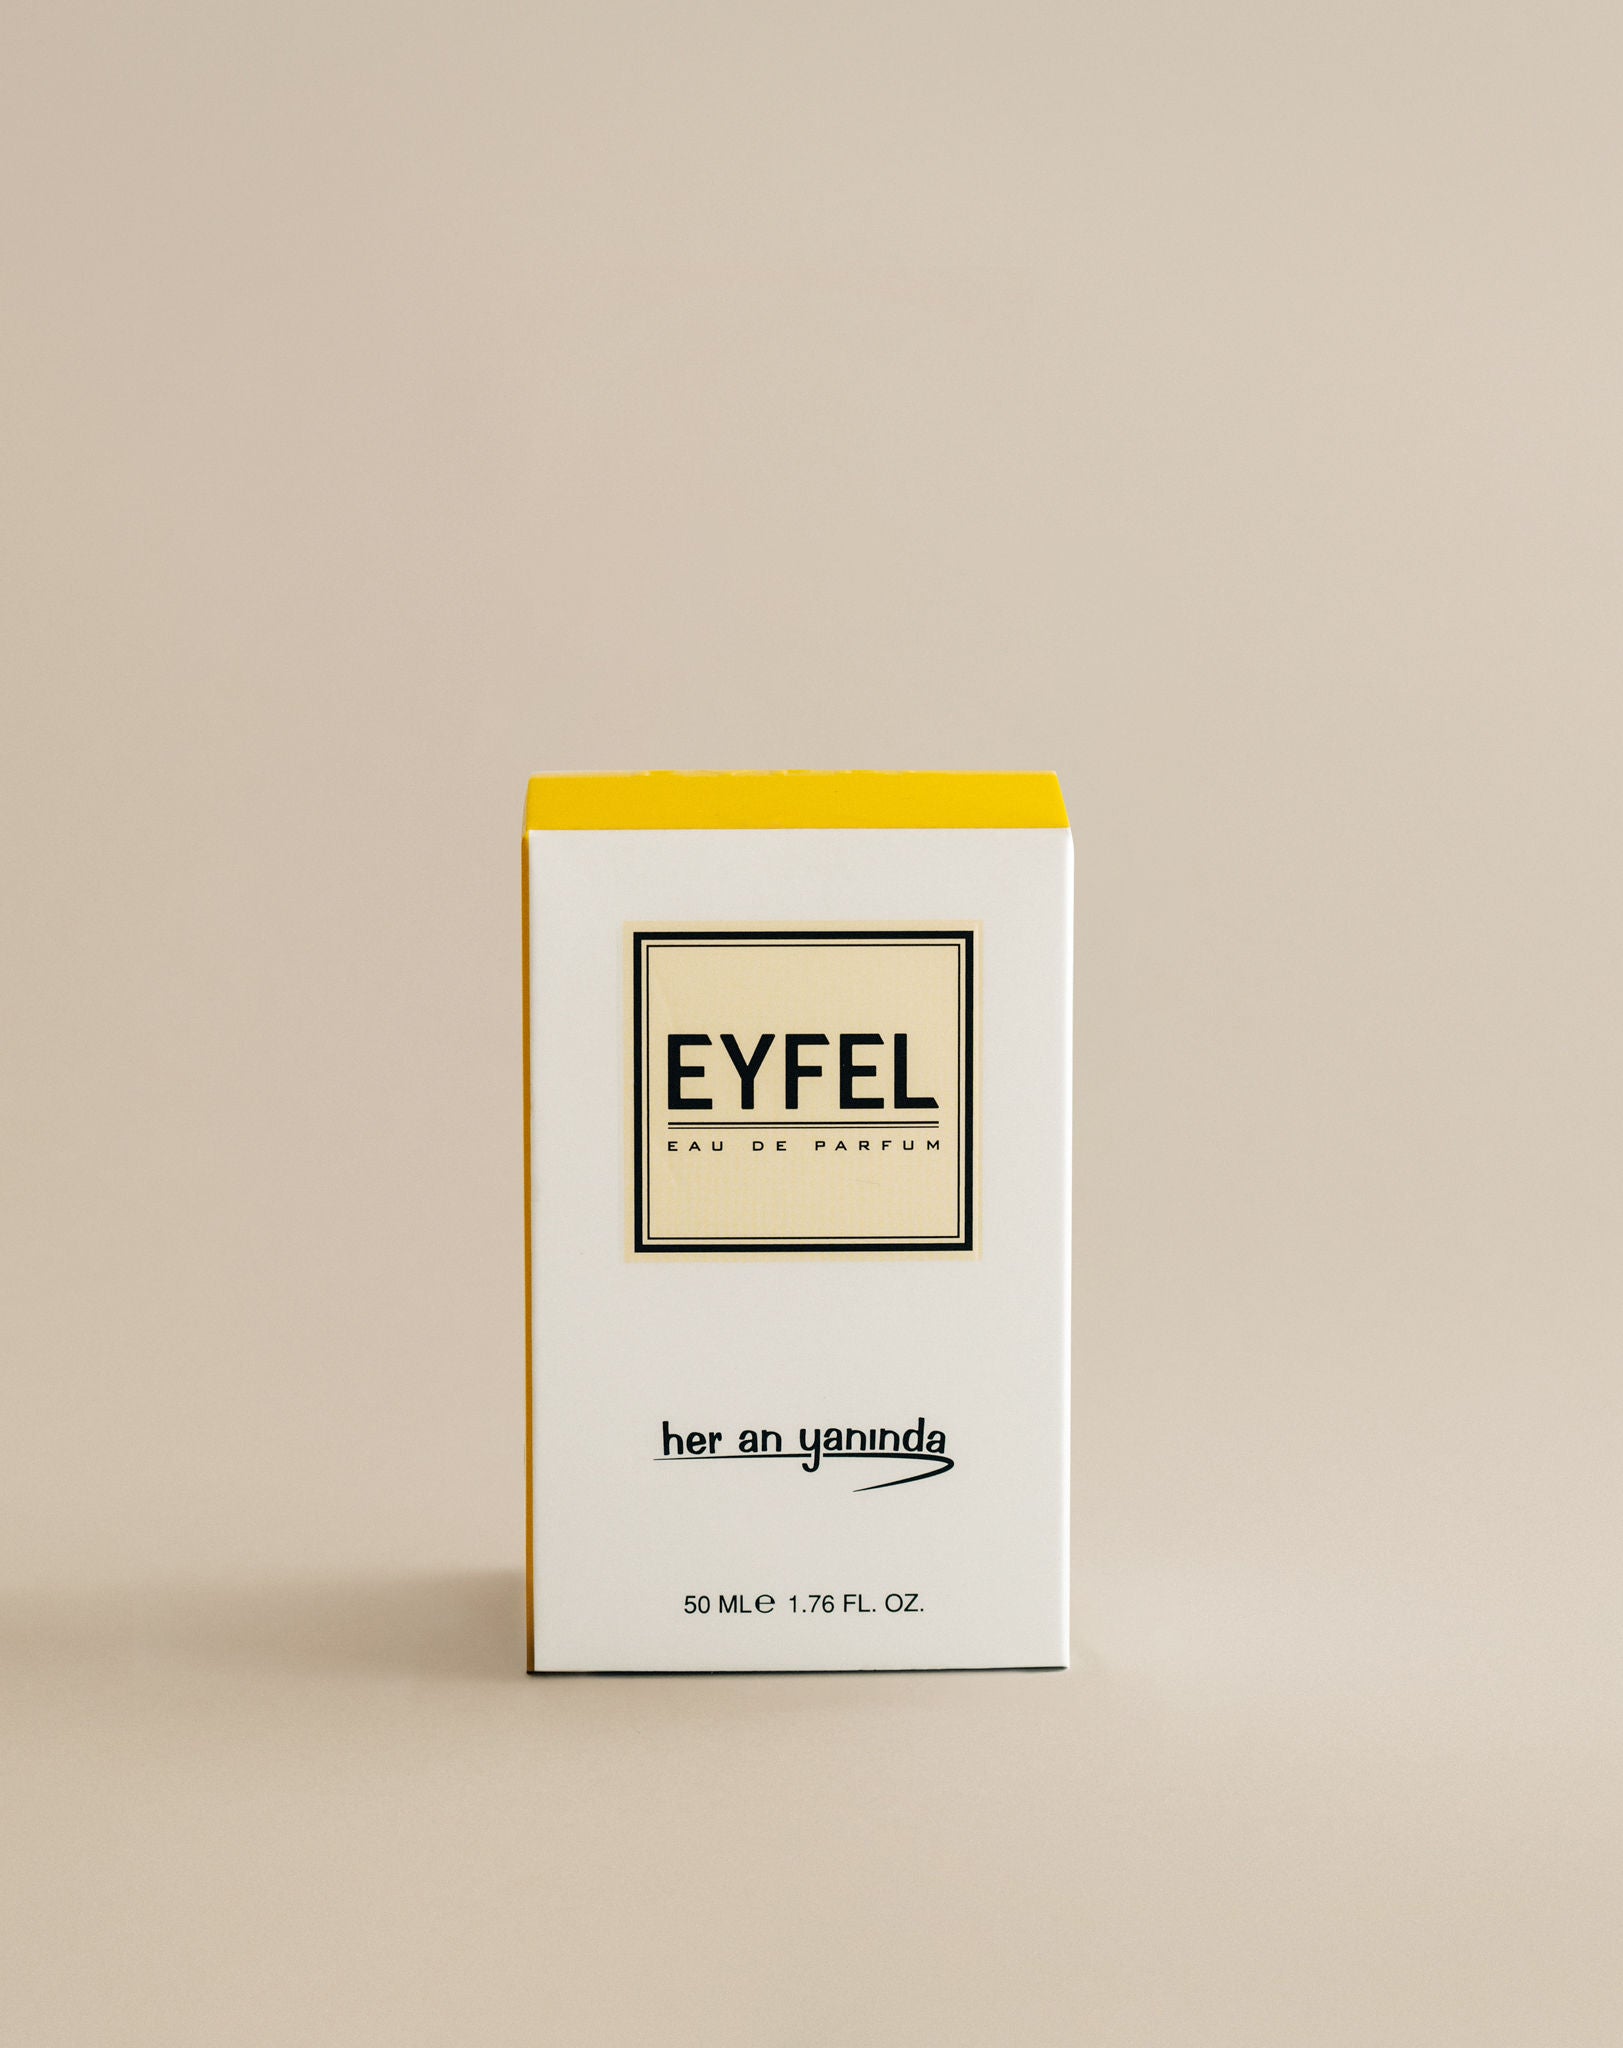 Inspired by Collection W6 – Eyfel Perfume